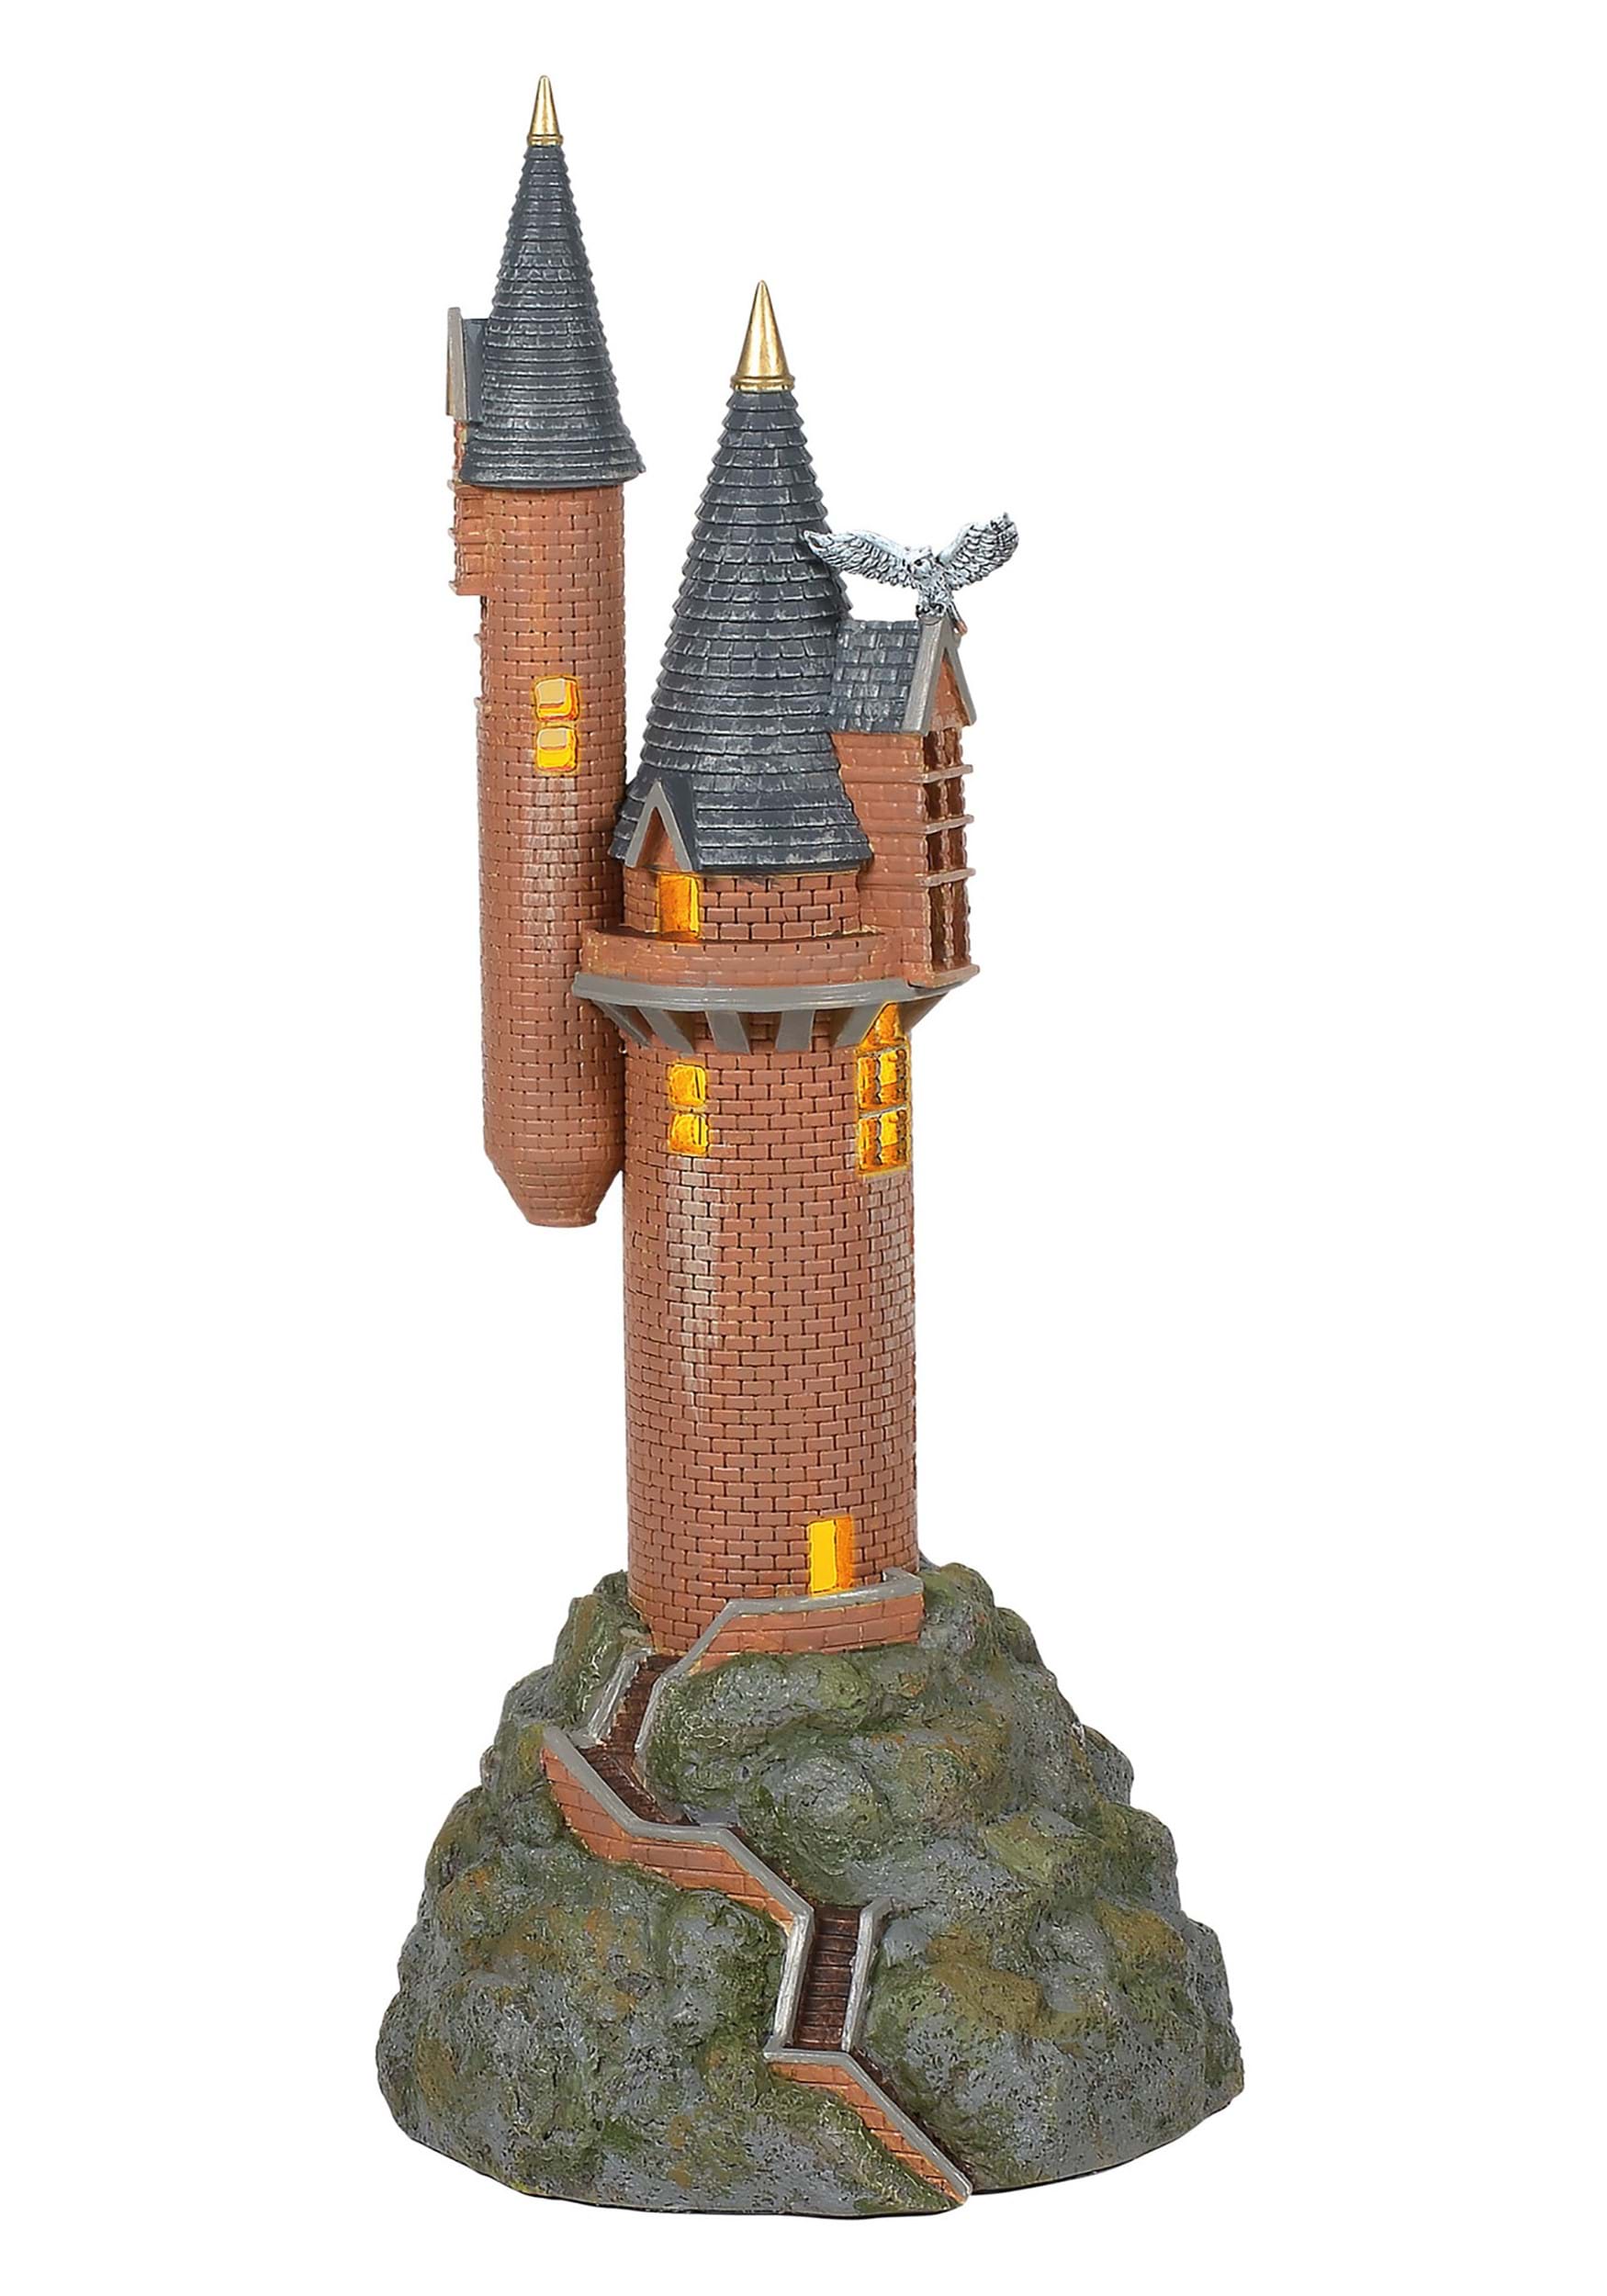 Department 56 Harry Potter the Owlery Tower